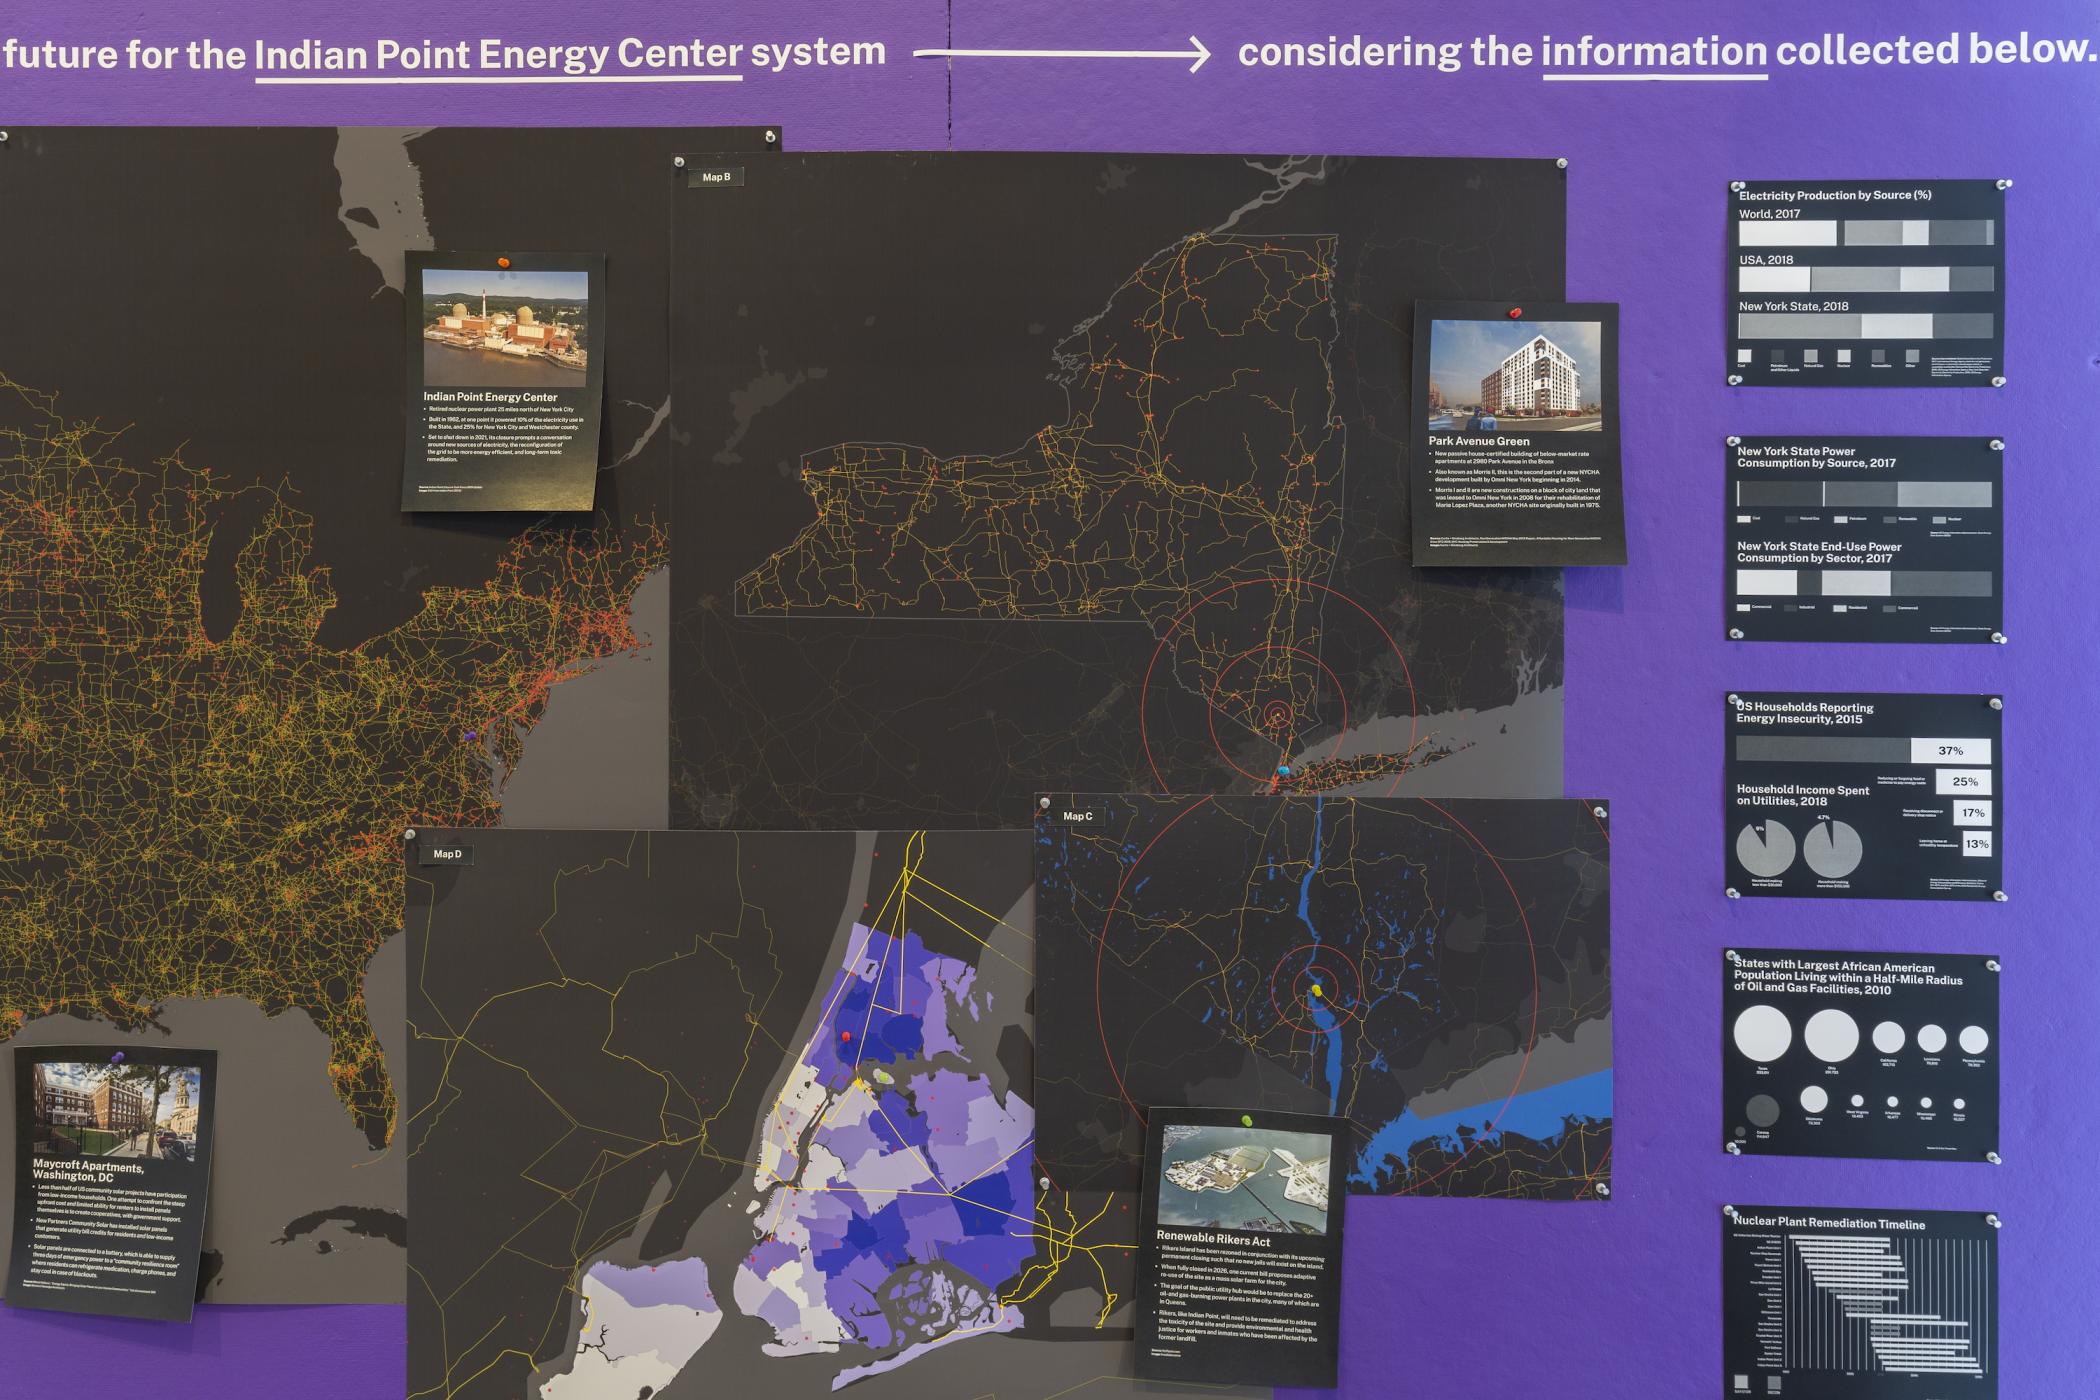 A close-up view of maps and other Green New Deal–related data visualizations pertinent to the Indian Point Energy Center System